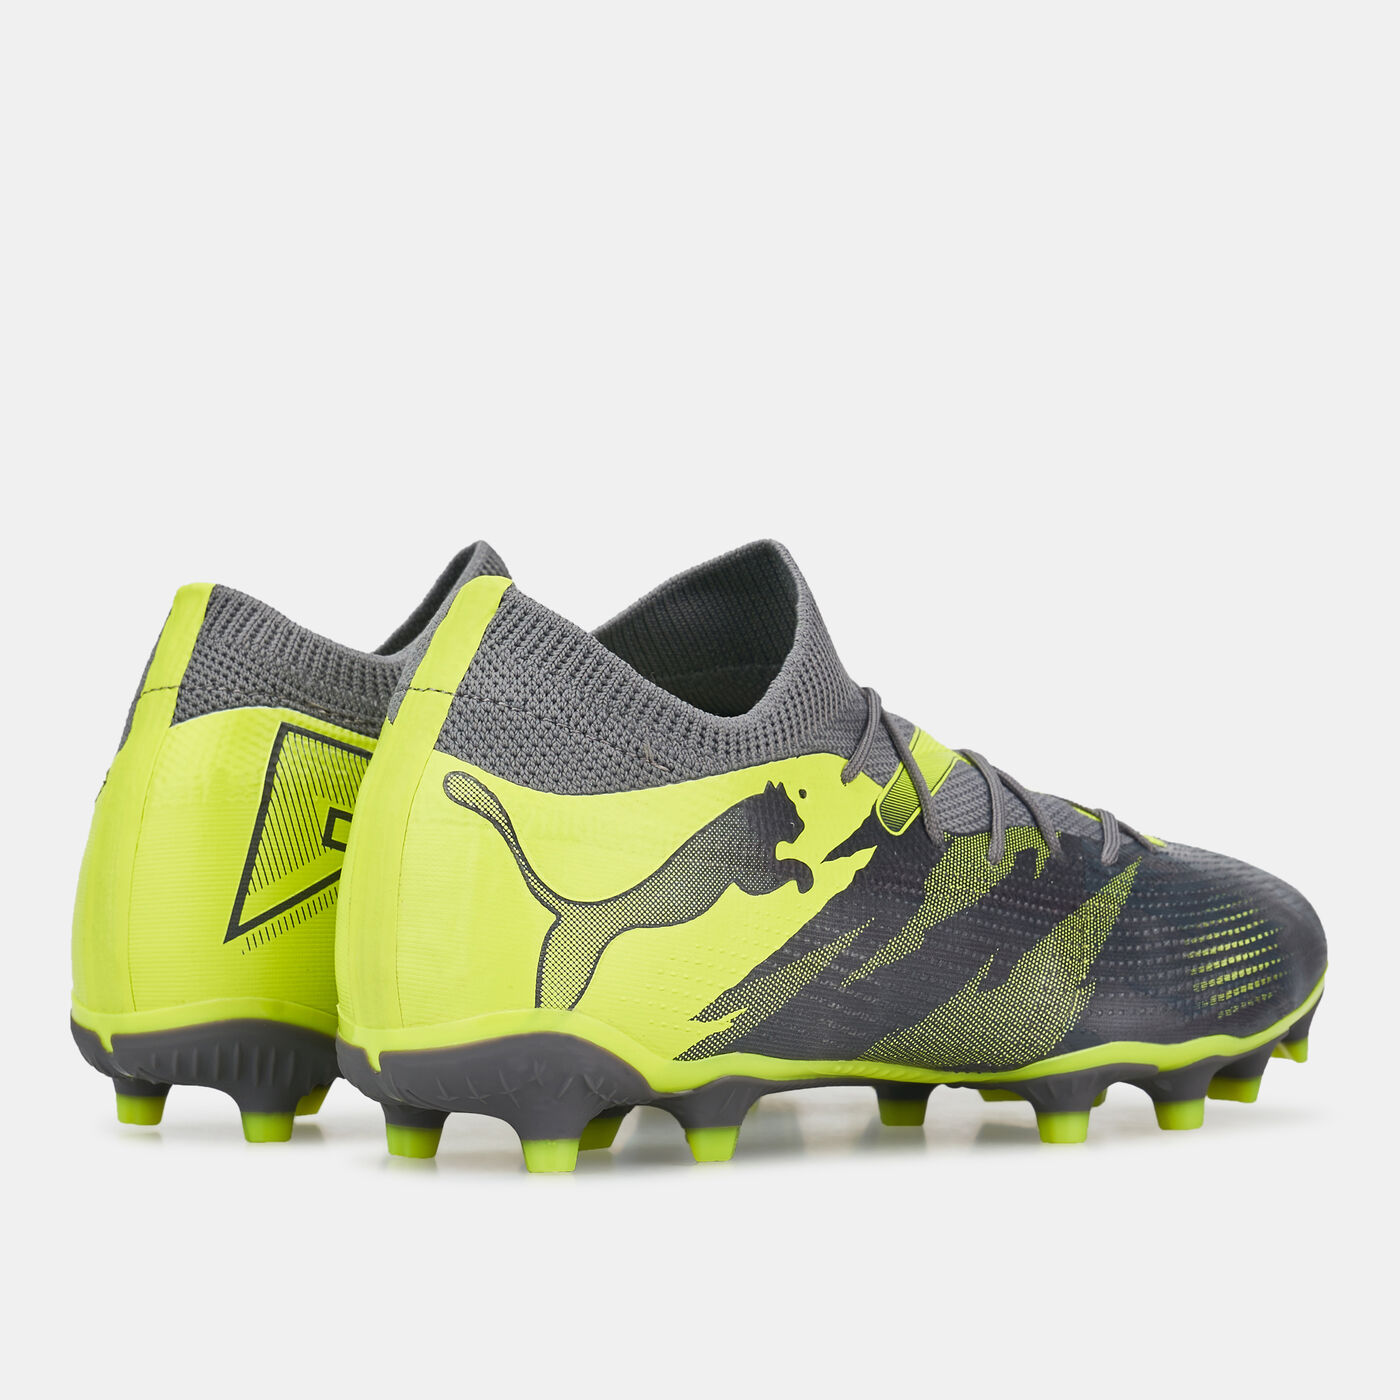 Men's Future 7 Match Rush Firm Ground/Artificial Ground Football Shoes